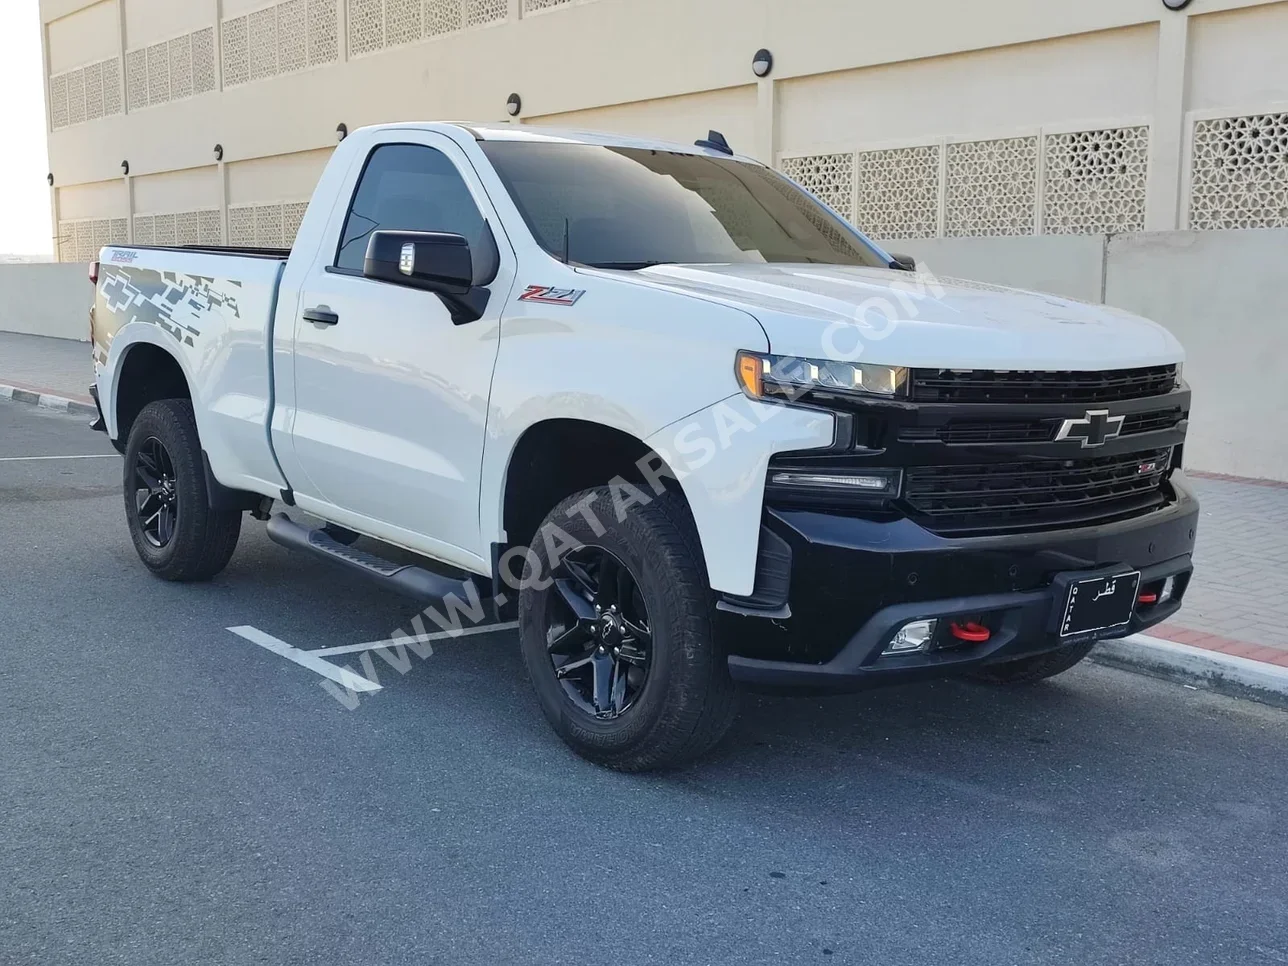  Chevrolet  Silverado  Trail Boss  2020  Automatic  94,000 Km  8 Cylinder  Four Wheel Drive (4WD)  Pick Up  White  With Warranty